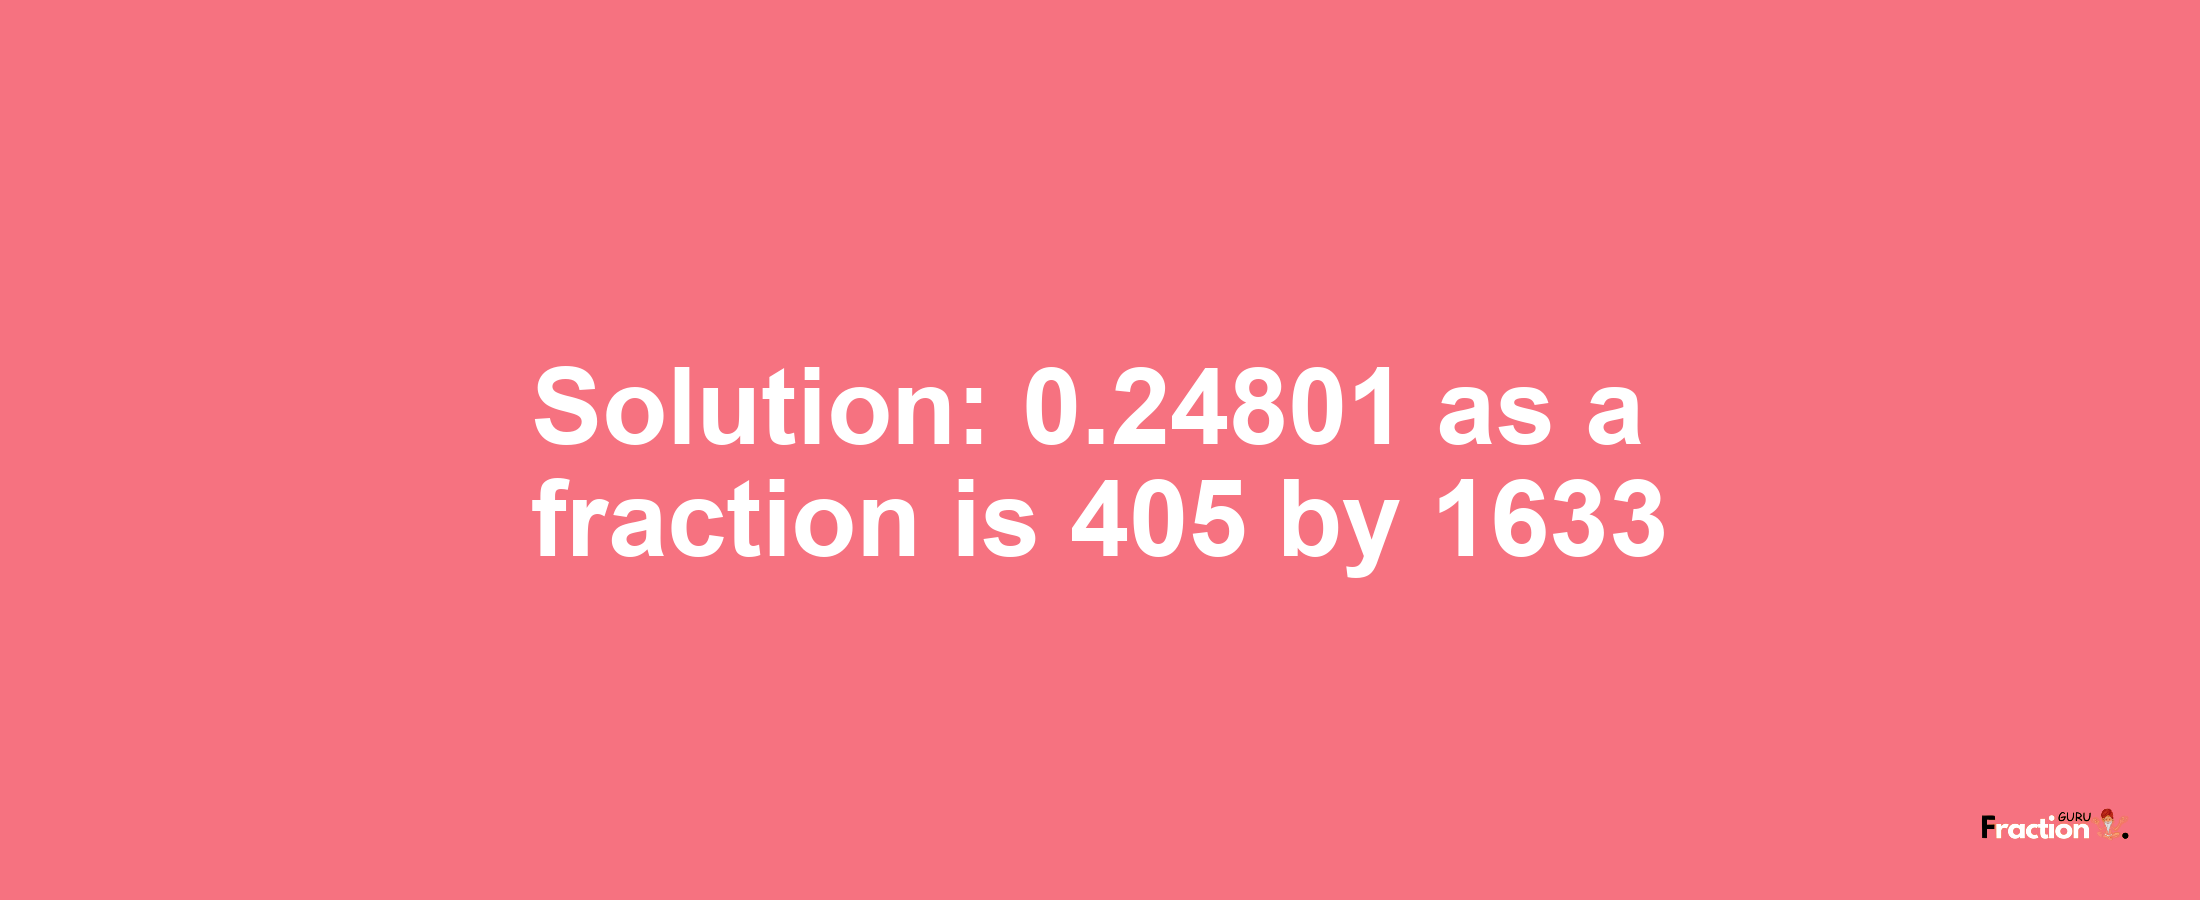 Solution:0.24801 as a fraction is 405/1633